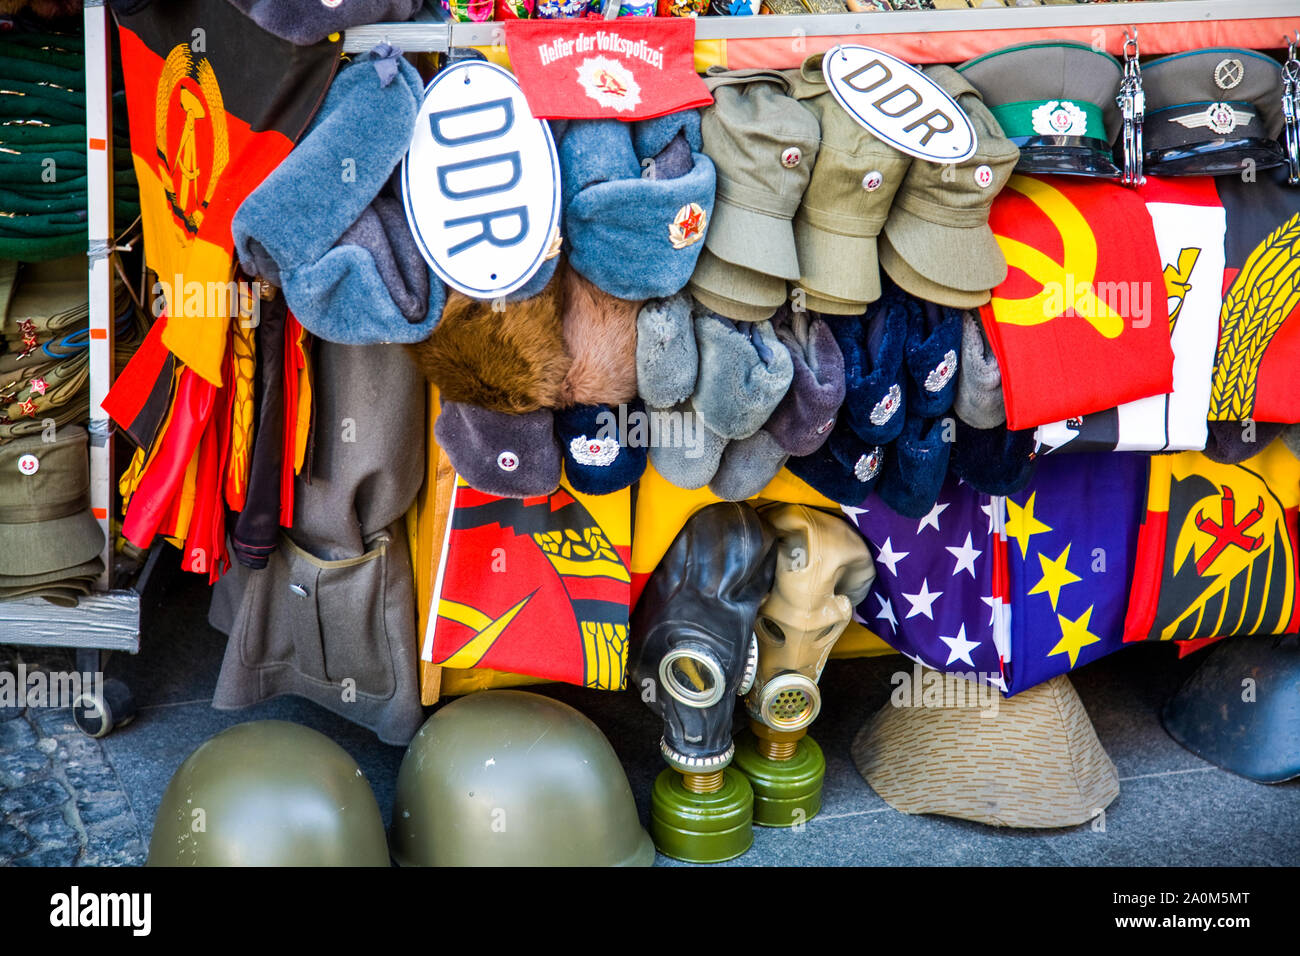 Cold war memorabilia is popular with tourists in Berlin Germany Stock Photo